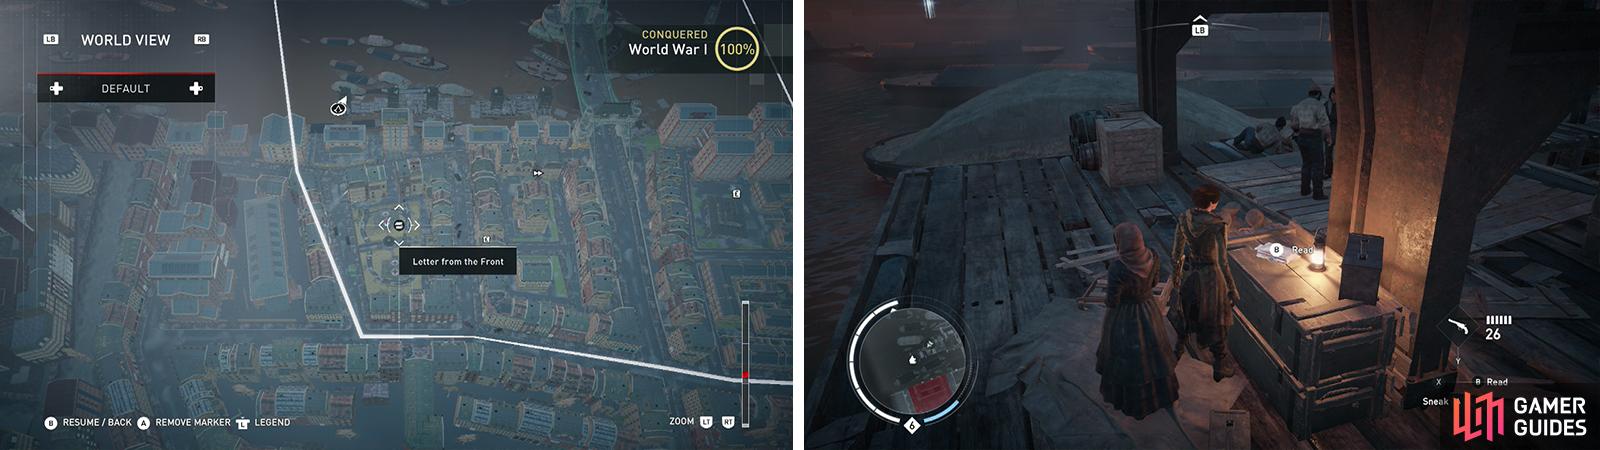 The Letters from the Front icon on the world map (left) and what they look like in-game (right).